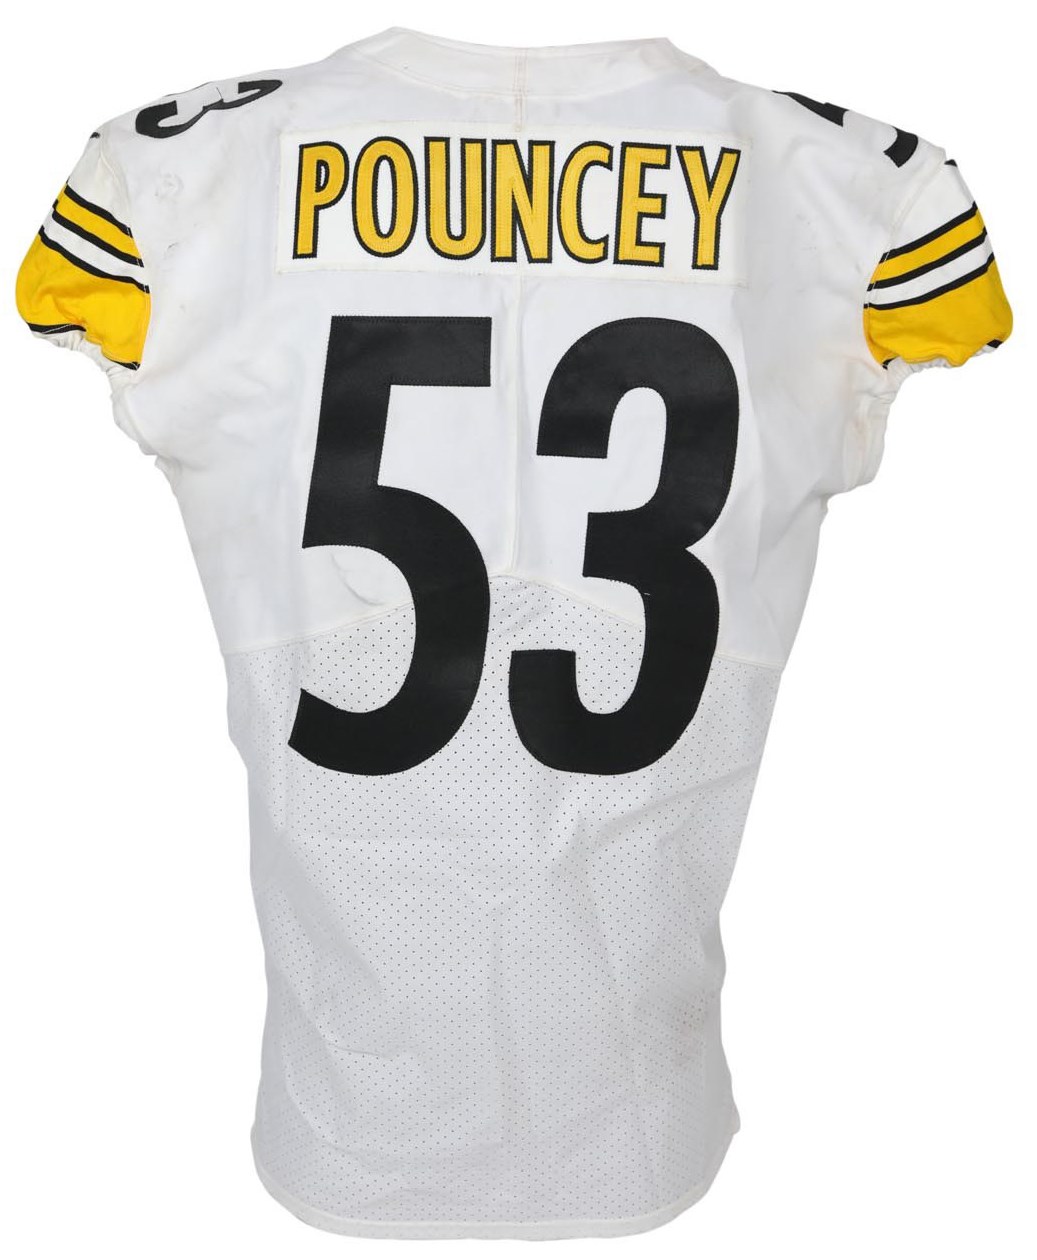 pouncey steelers jersey